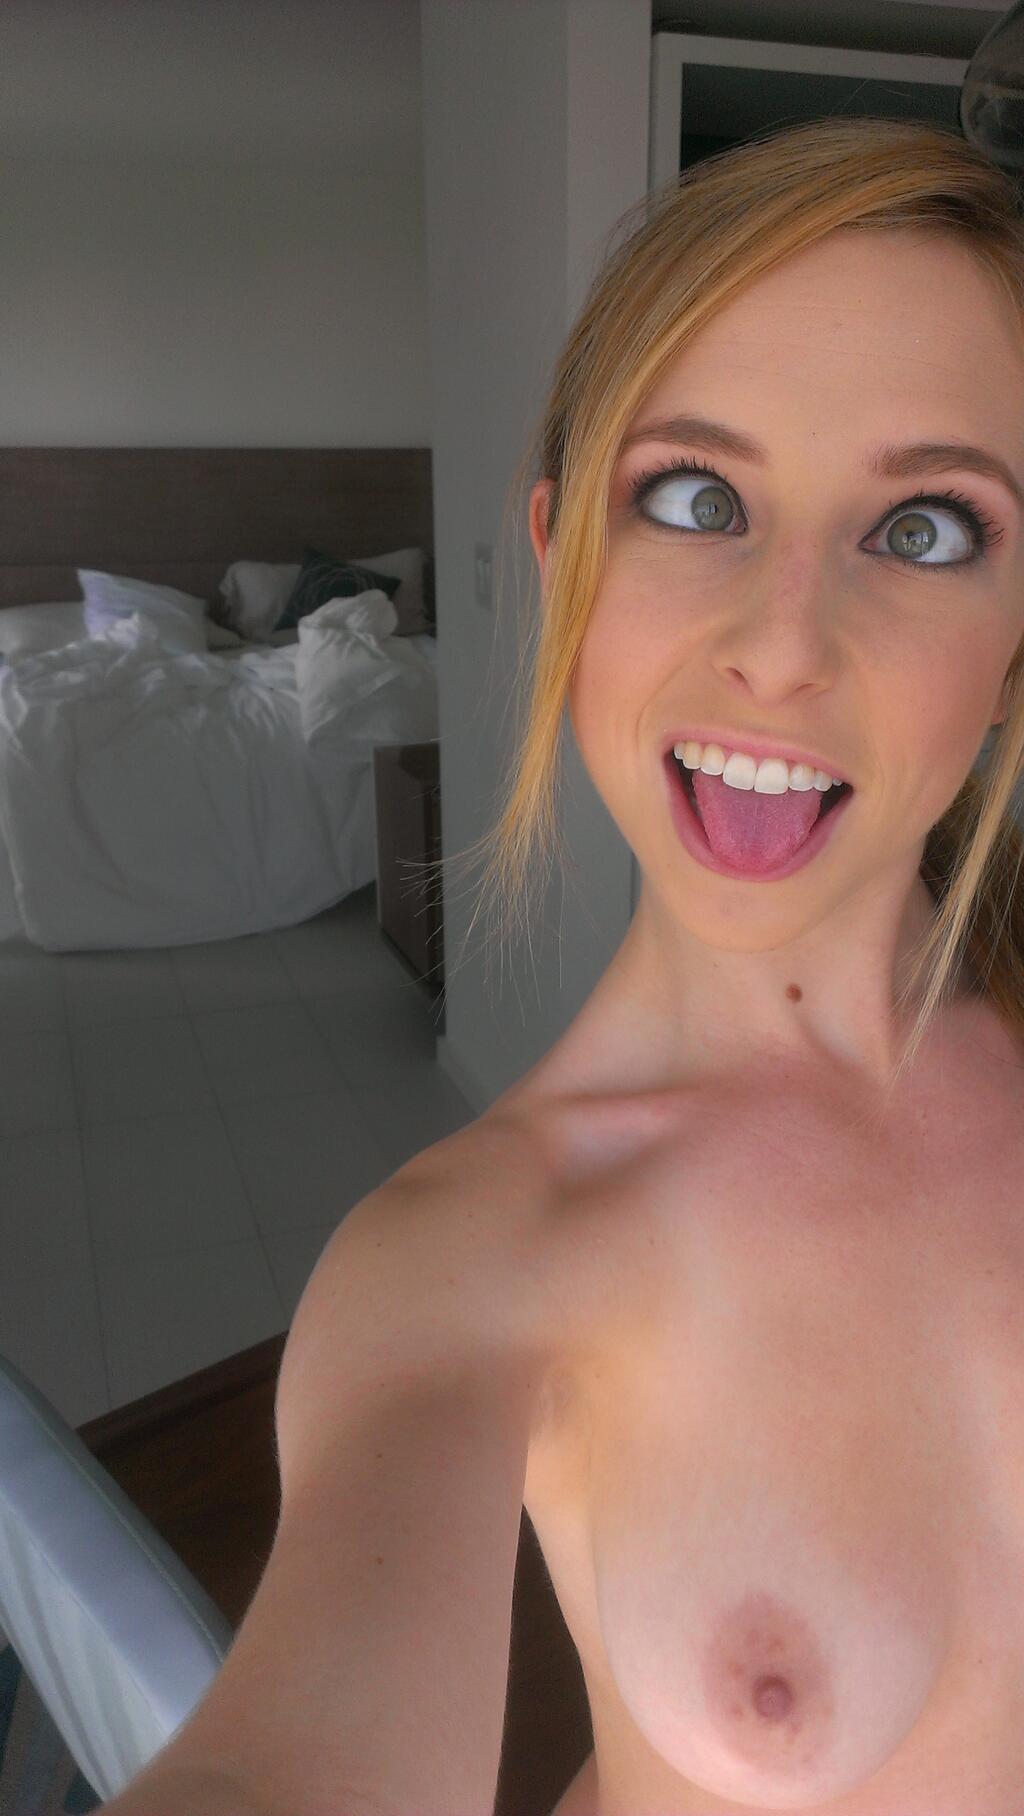 Silly nude selfies